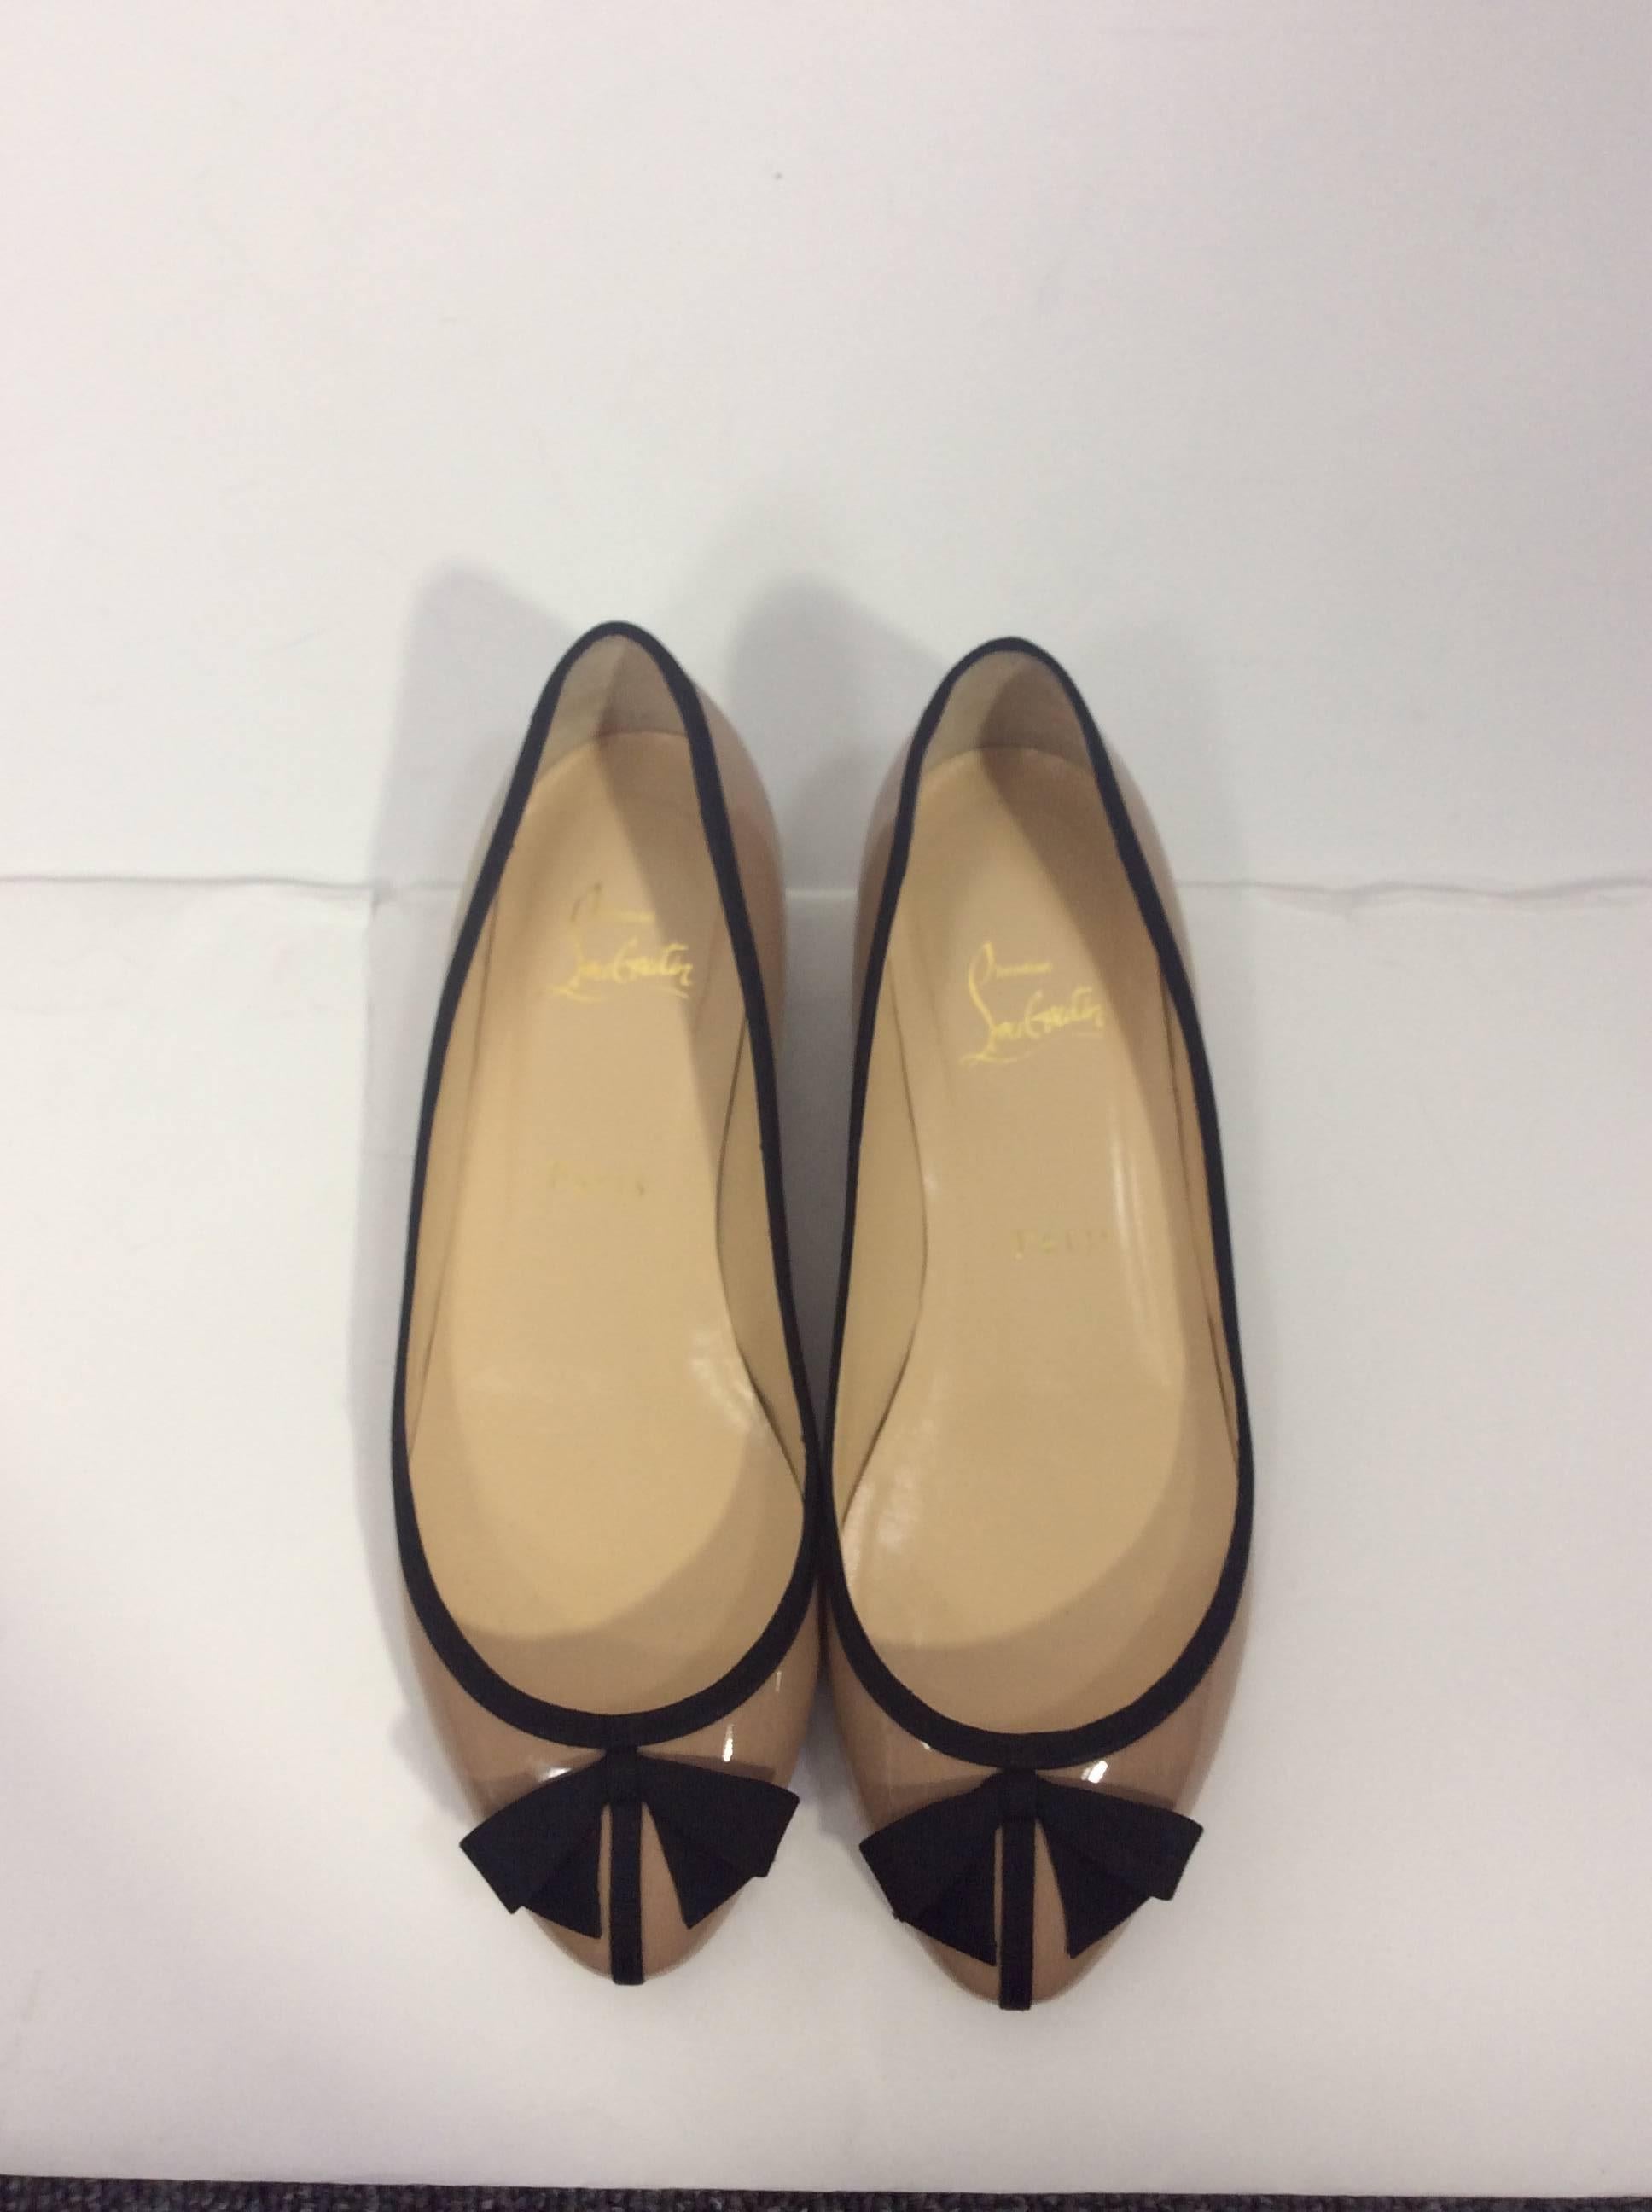 Christian Louboutin Nude Flats
Black trim with black small bow
Patent Leather
Comes with box, original price $765 
Size 37.5